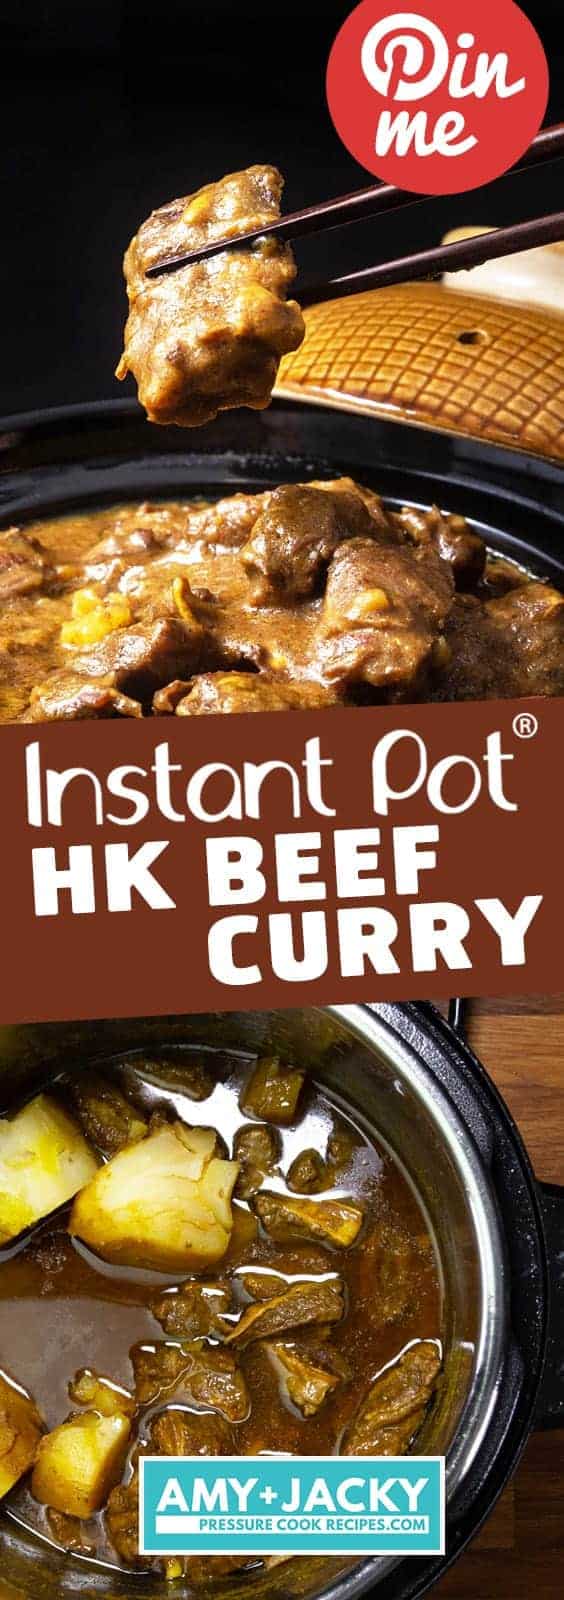 Instant Pot HK Beef Curry | Instant Pot Beef Curry | Instant Pot Curry | Pressure Cooker Beef Curry | Pressure Cooker Curry | Instant Pot Recipes | Pressure Cooker Recipes | 咖喱牛腩 #instantpot #pressurecooker #beef #dinner #easy #chinese